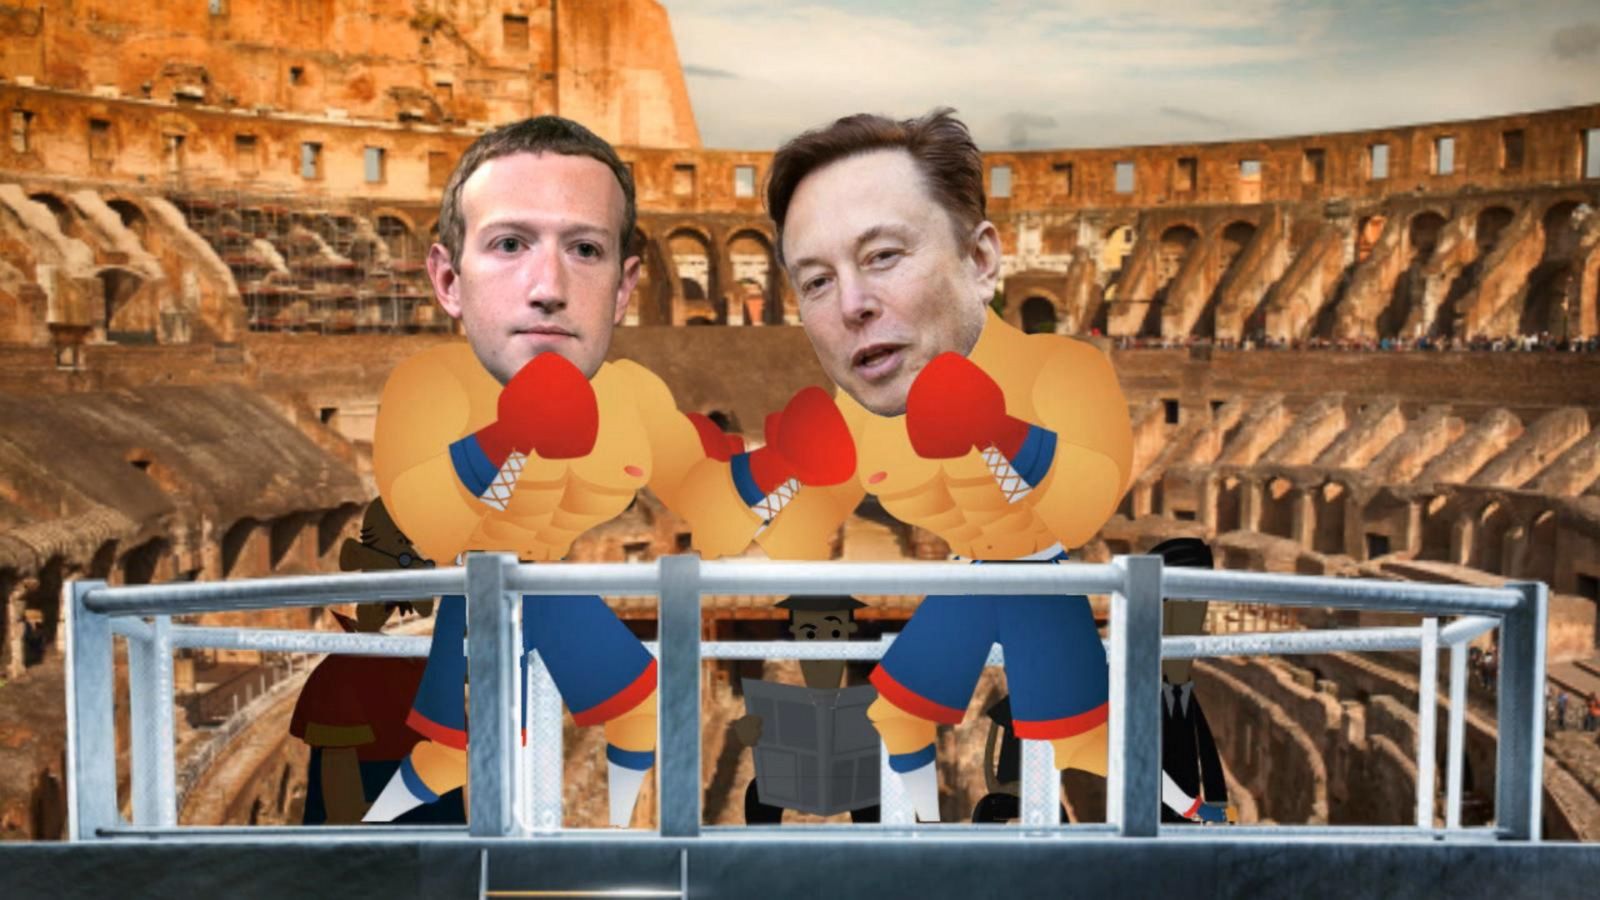 Potential MMA style fight between Zuckerberg and Musk